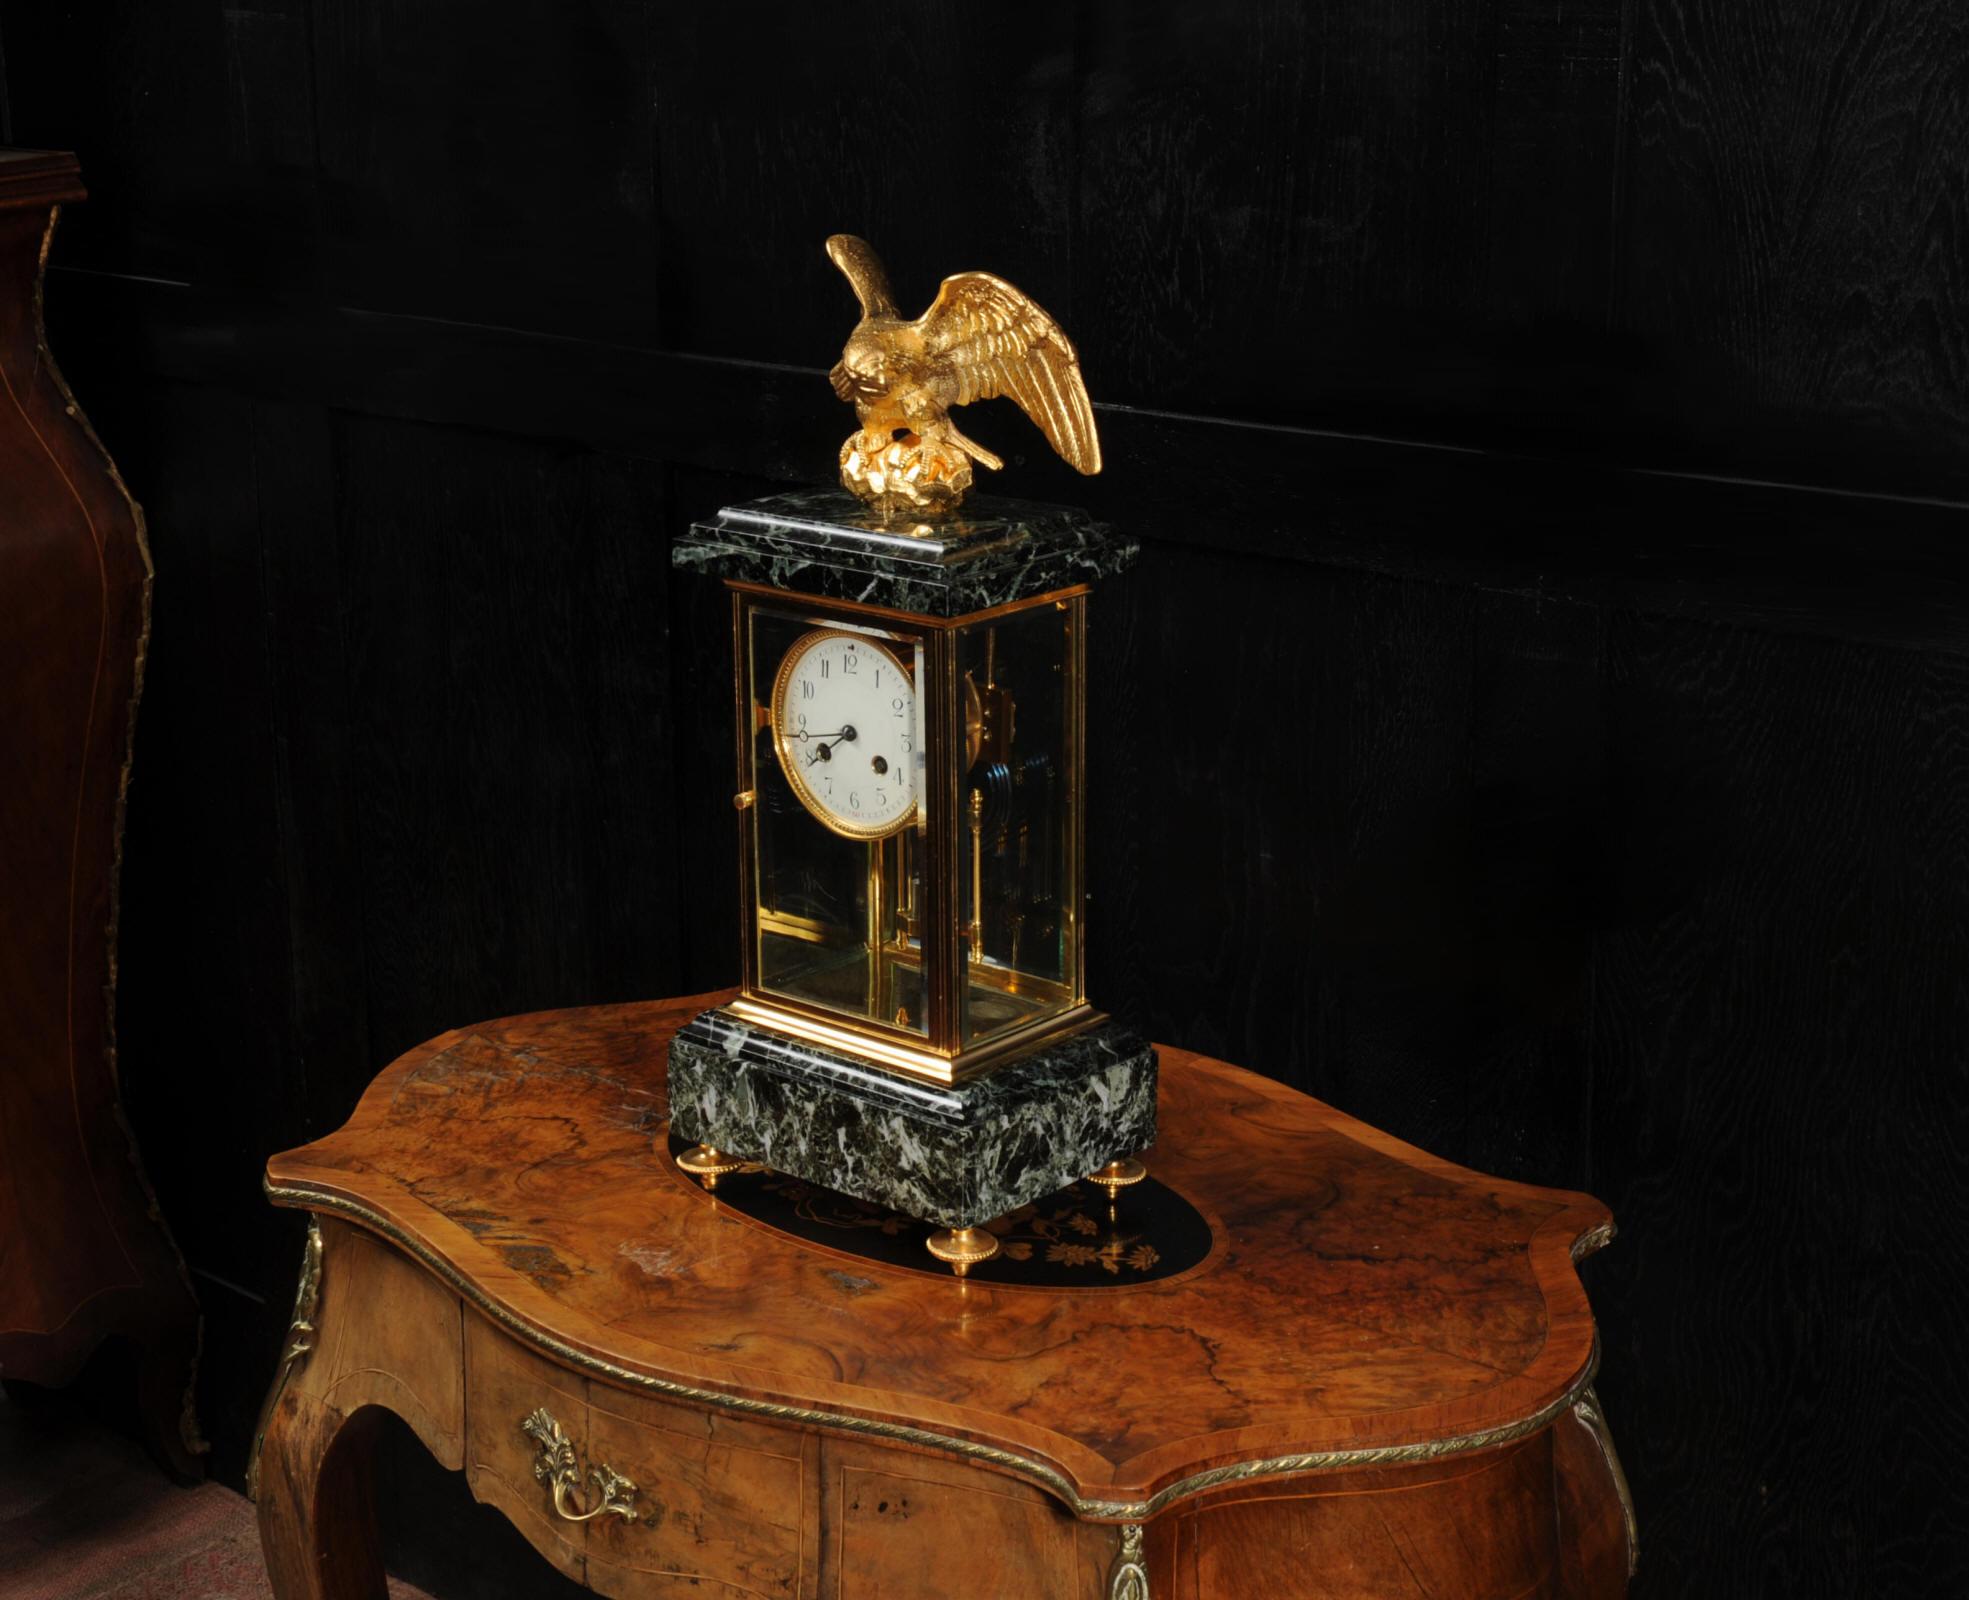 Empire Ormolu and Green Marble Four Glass Clock, Eagle Antique French In Good Condition For Sale In Belper, Derbyshire